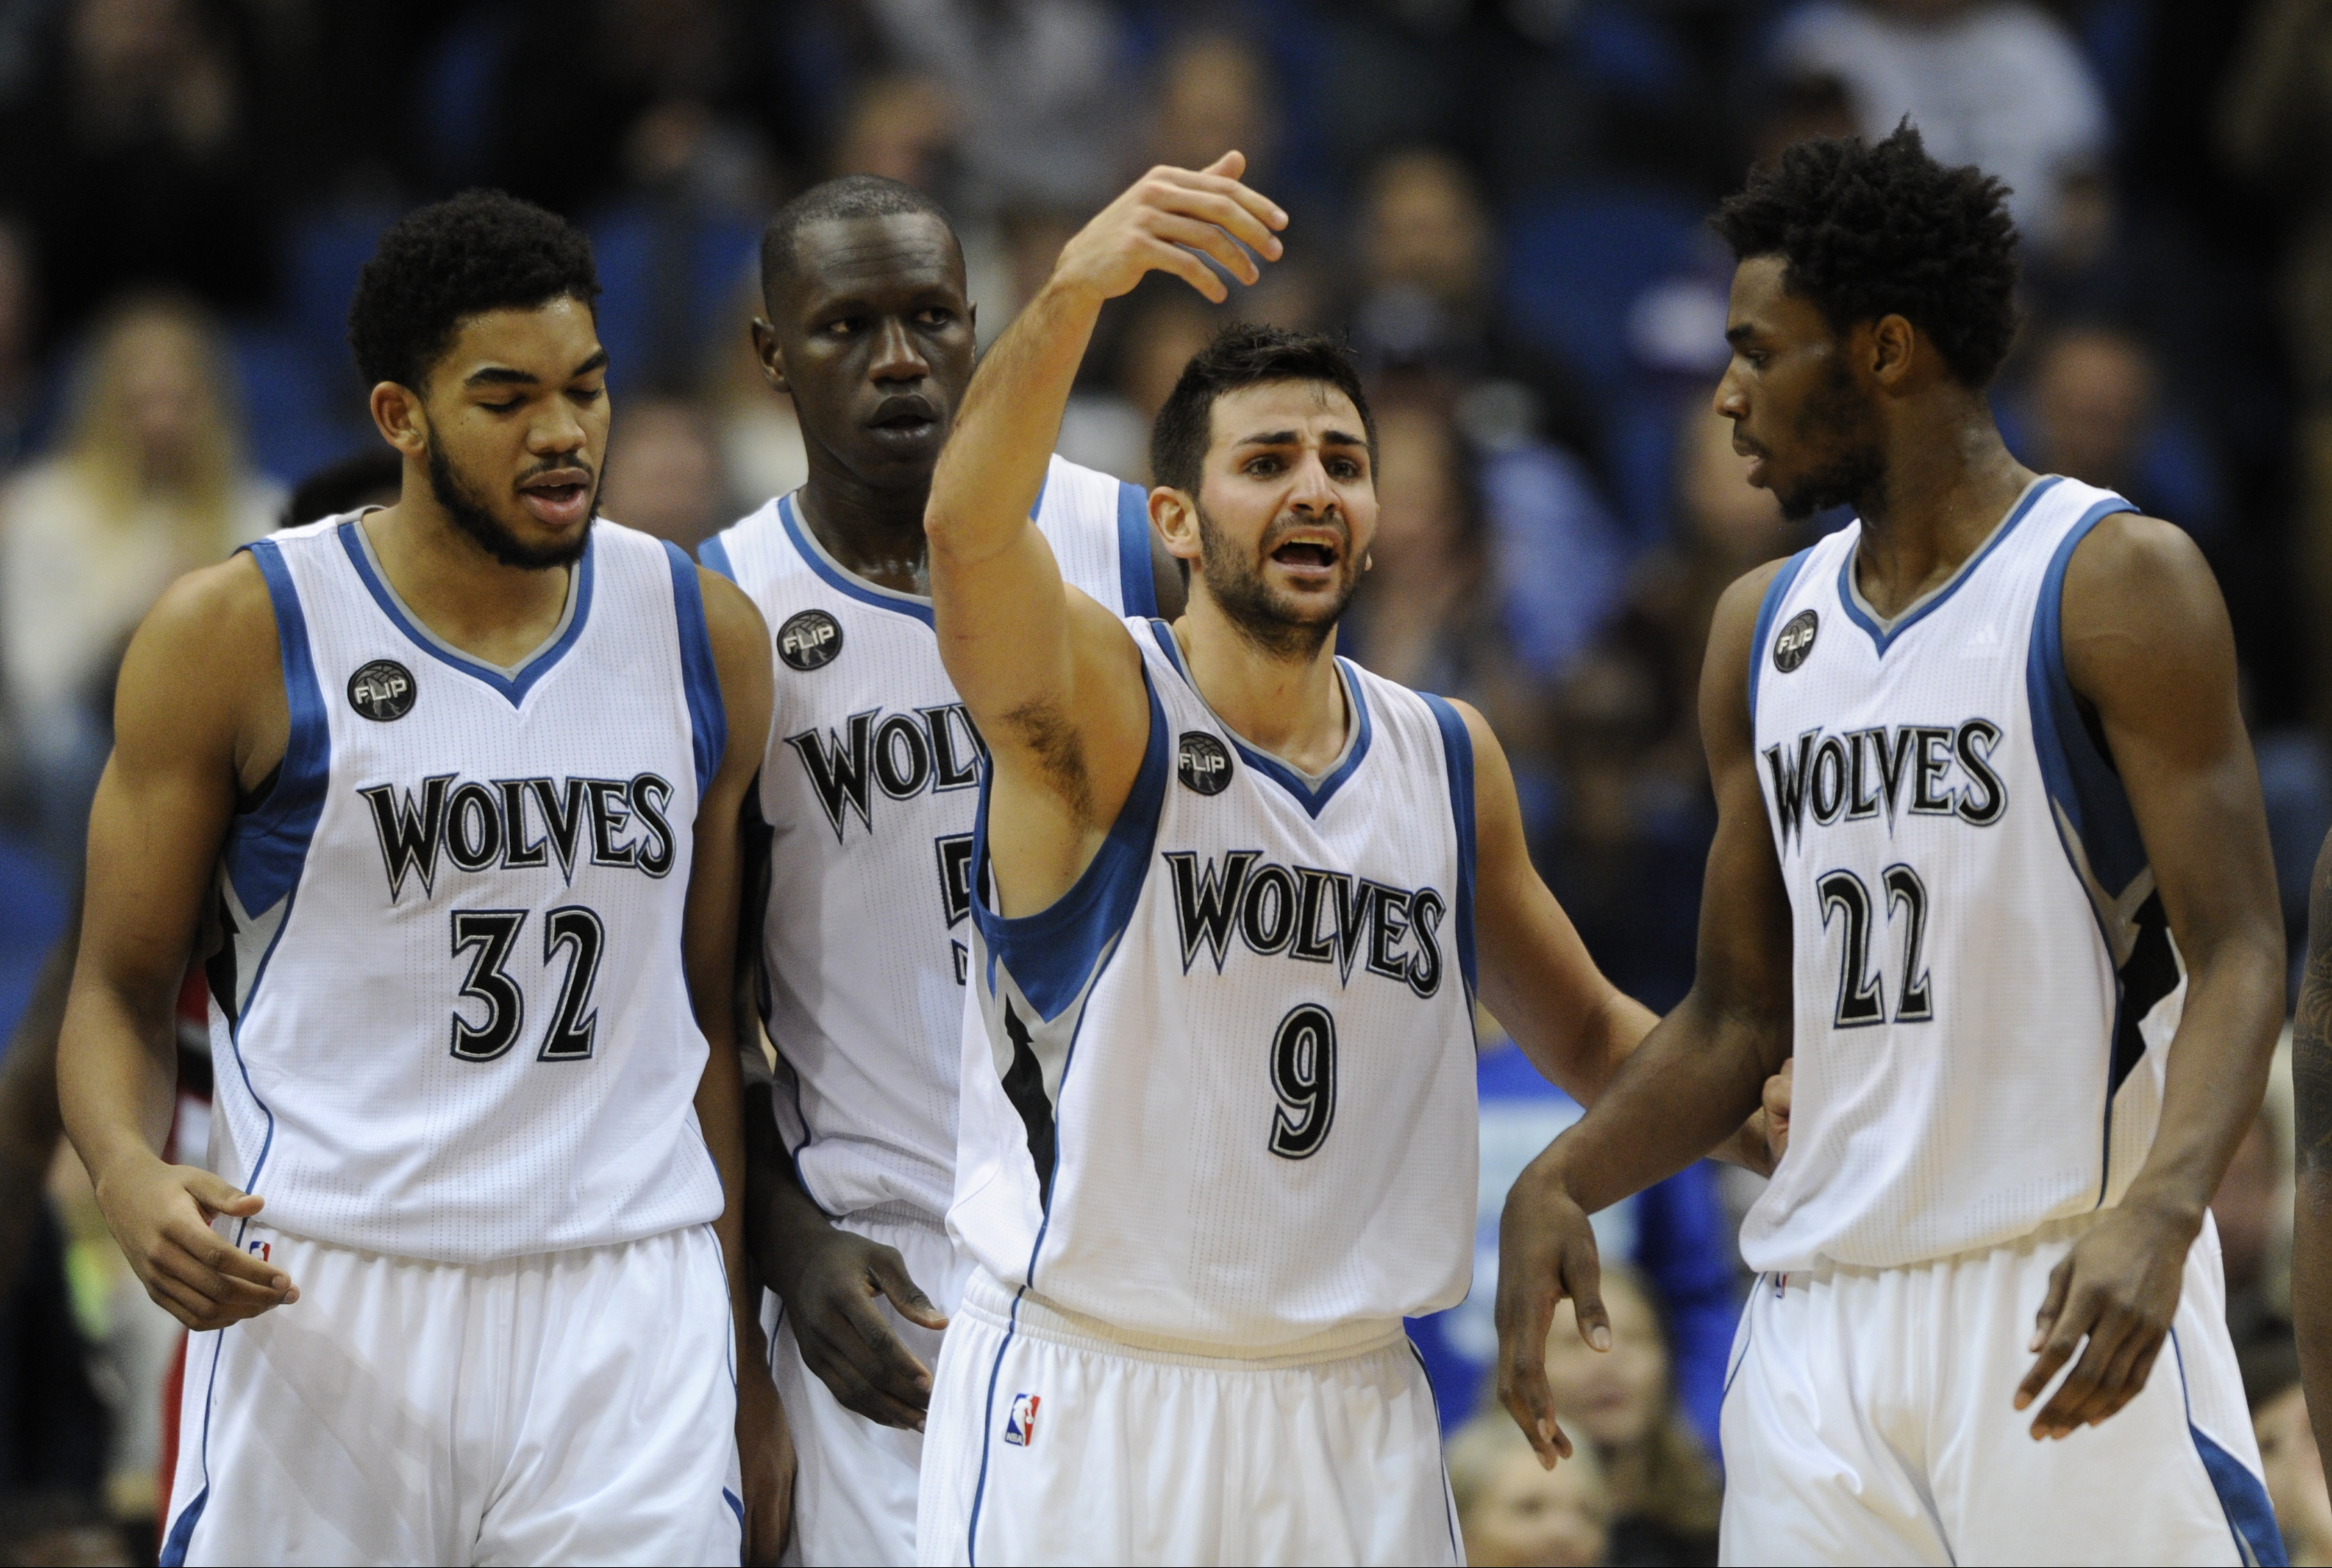 Minnesota Timberwolves center Karl-Anthony Towns (32), left, center Gorgui Dieng (5), of Senegal, guard Ricky Rubio (9), of Spain, and guard Andrew Wiggins (22) huddle up during the fourth quarter of an NBA basketball game against the Portland Trail Blazers on Saturday, Dec. 5, 2015, in Minneapolis. (AP Photo/Hannah Foslien)